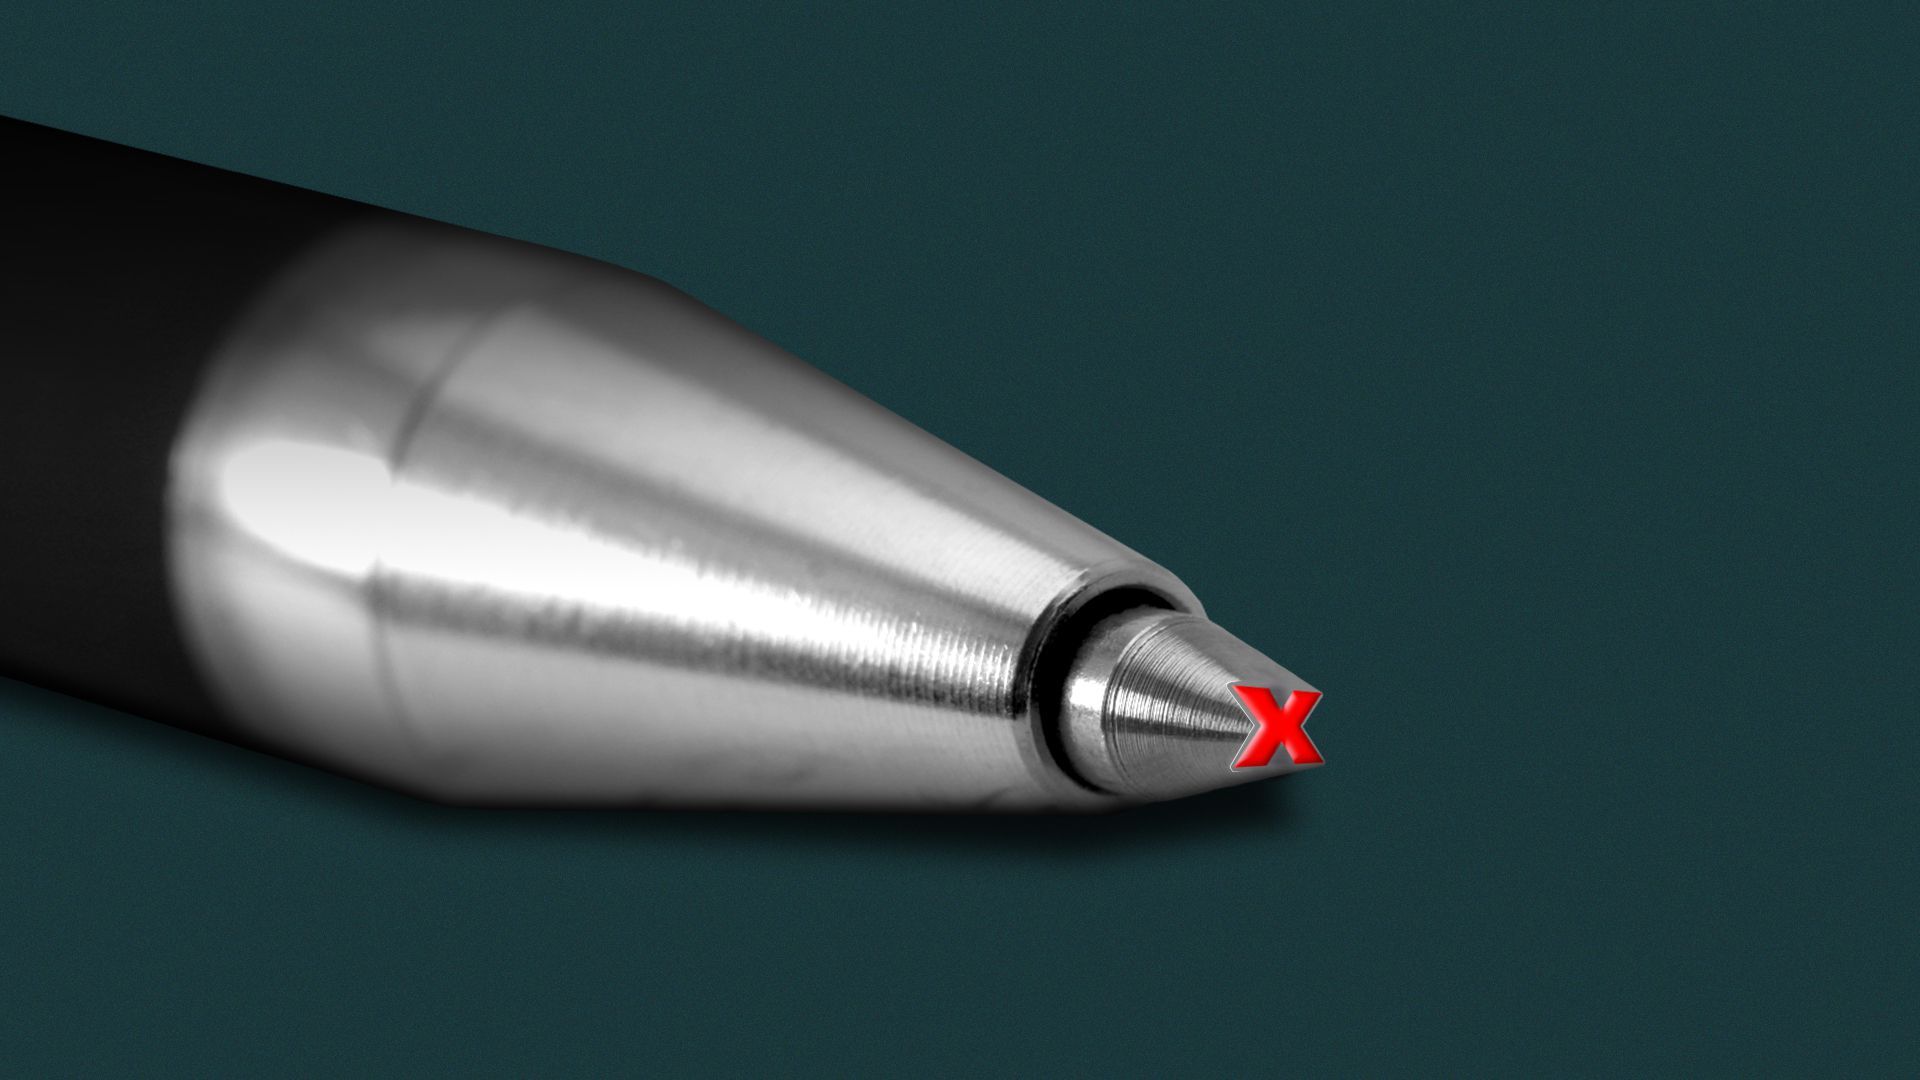 Illustration of a ballpoint pen with a red 